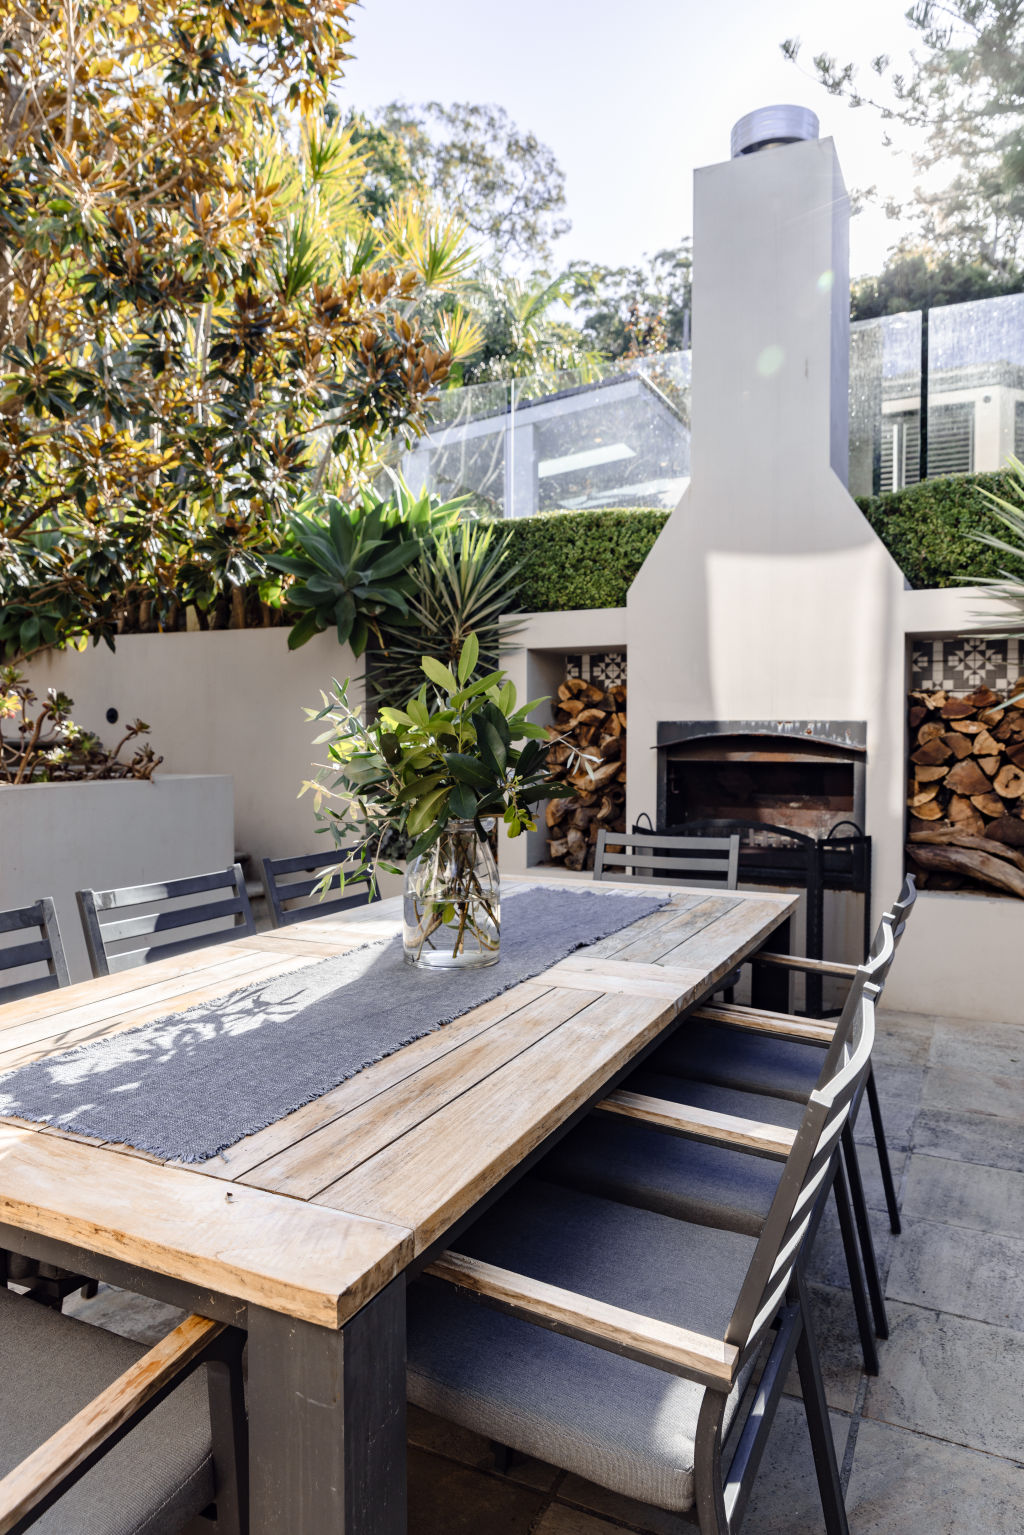 The outdoor dining area with a wood-burning fireplace. Photo: Trudy Pagden